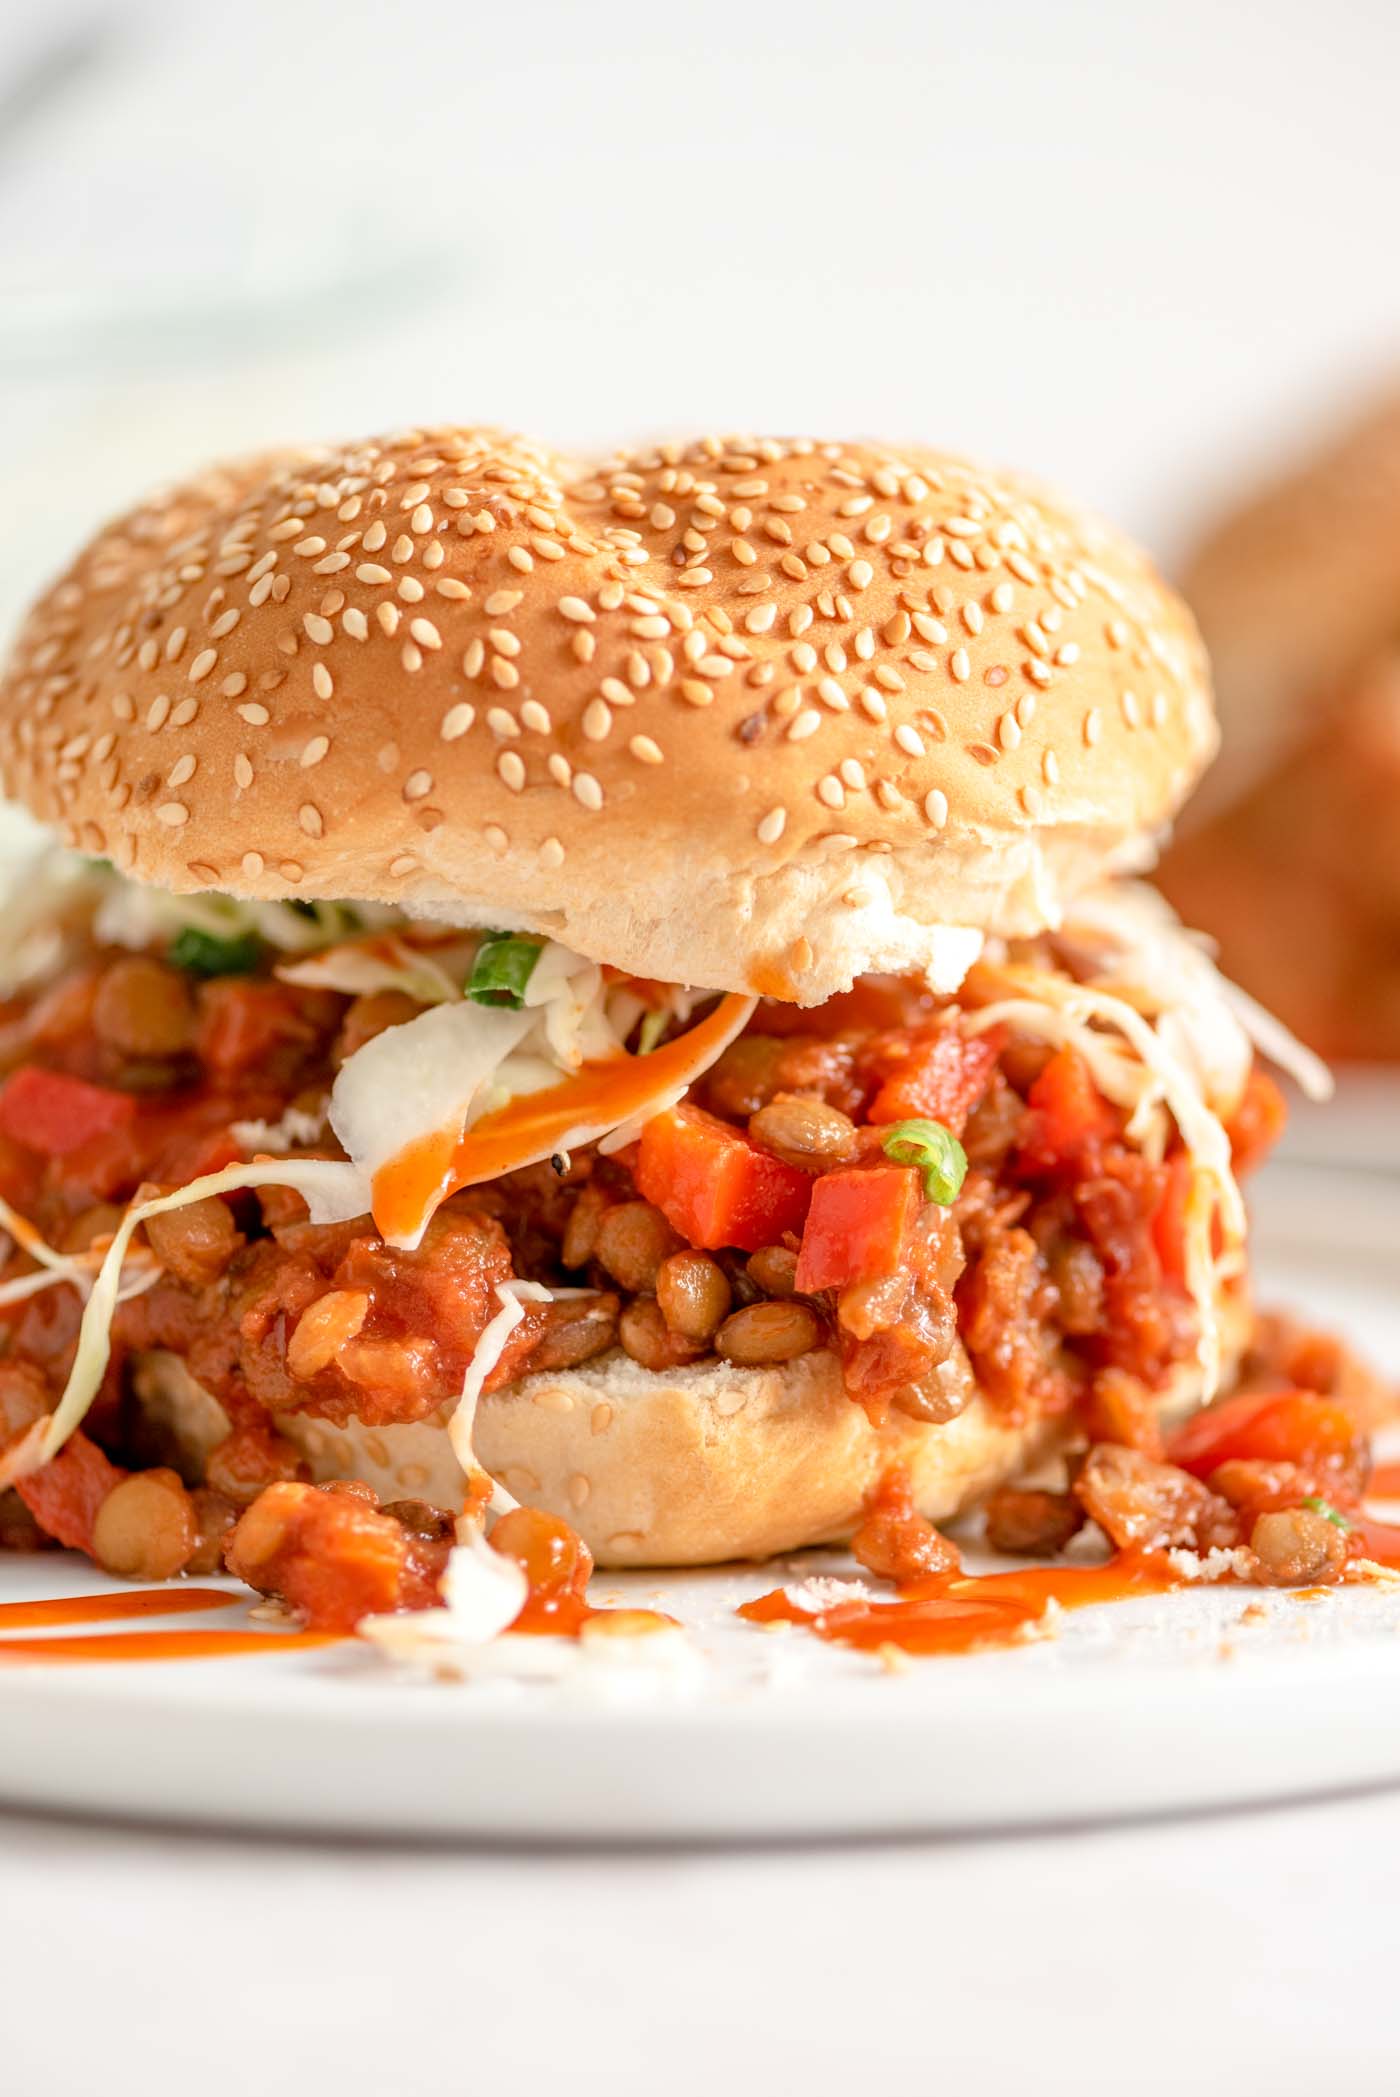 A lentil vegan sloppy joe sandwich with cabbage slaw drizzled with hot sauce on a plate.